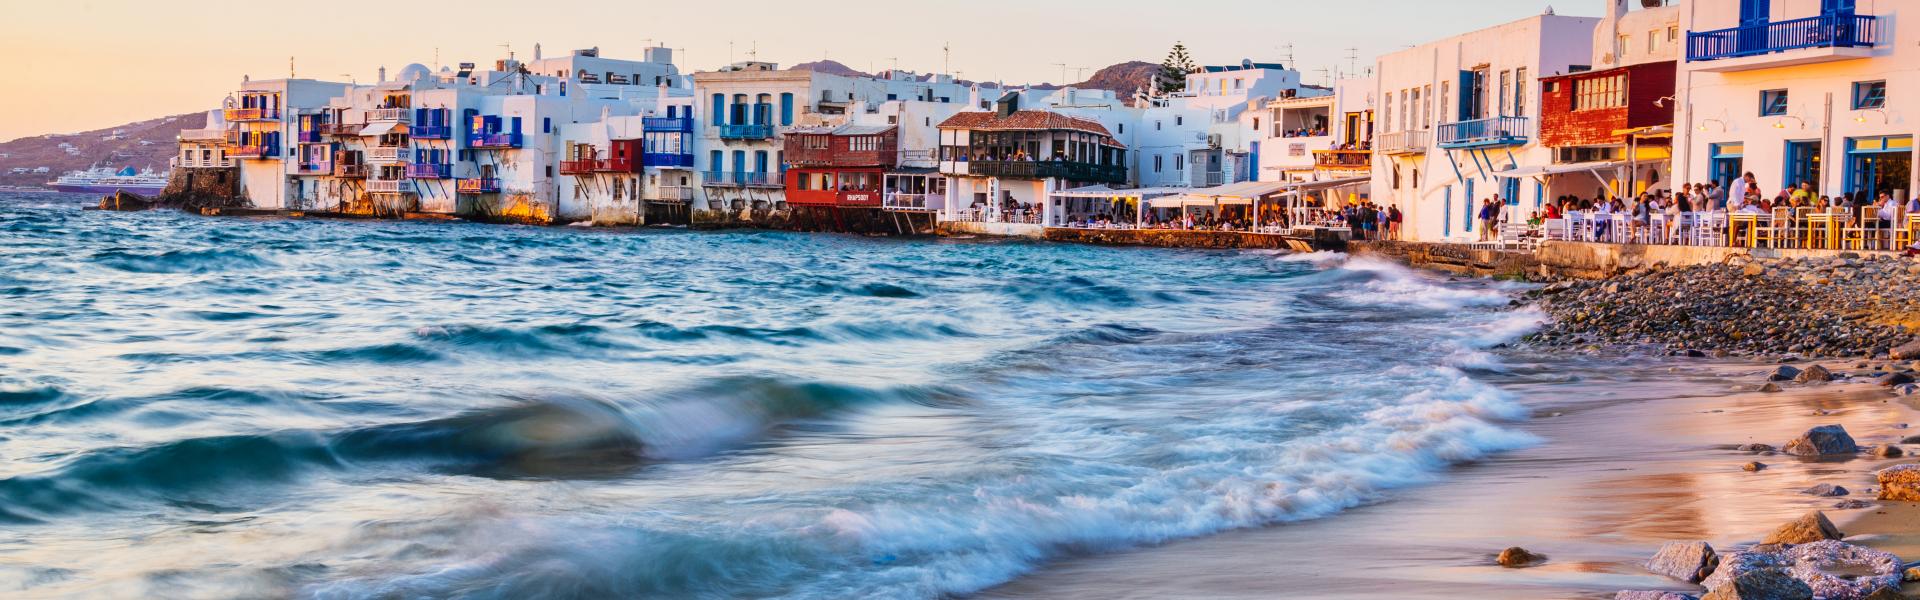 Find the perfect vacation home in Mykonos - Casamundo